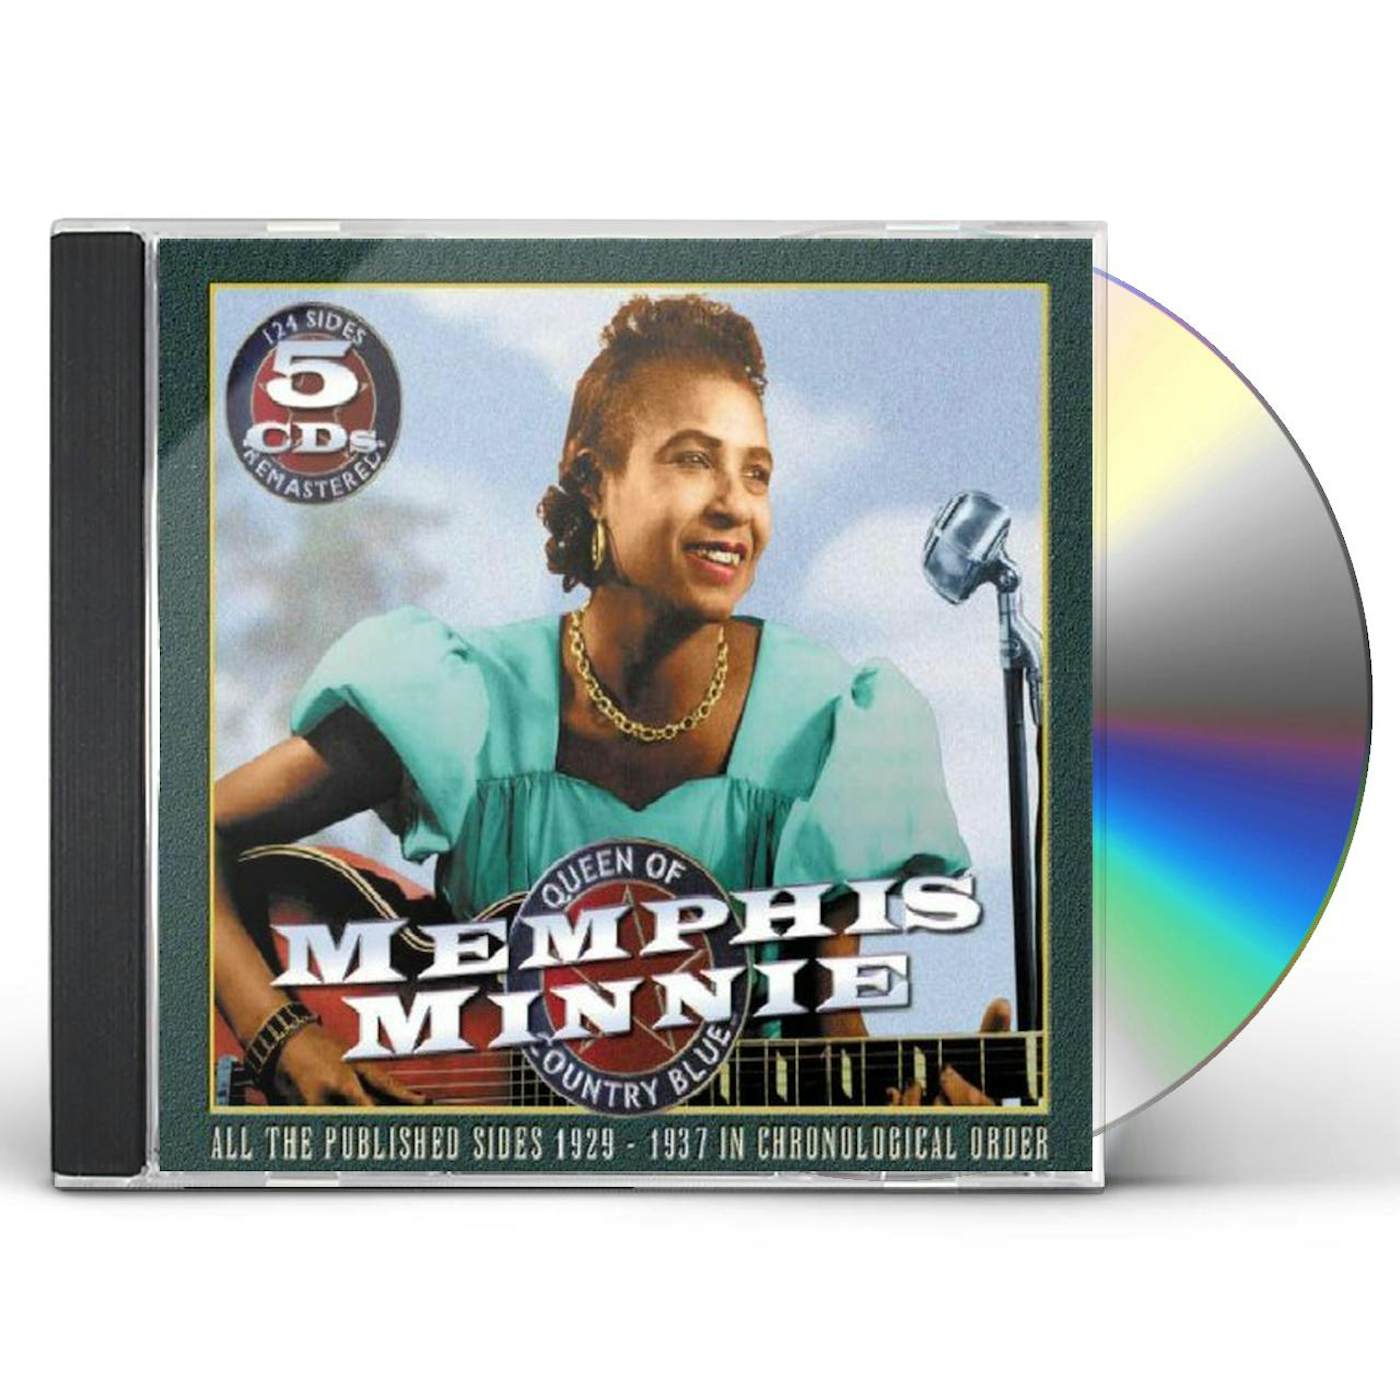 Memphis Minnie QUEEN OF COUNTRY BLUES 1929-1937 CD